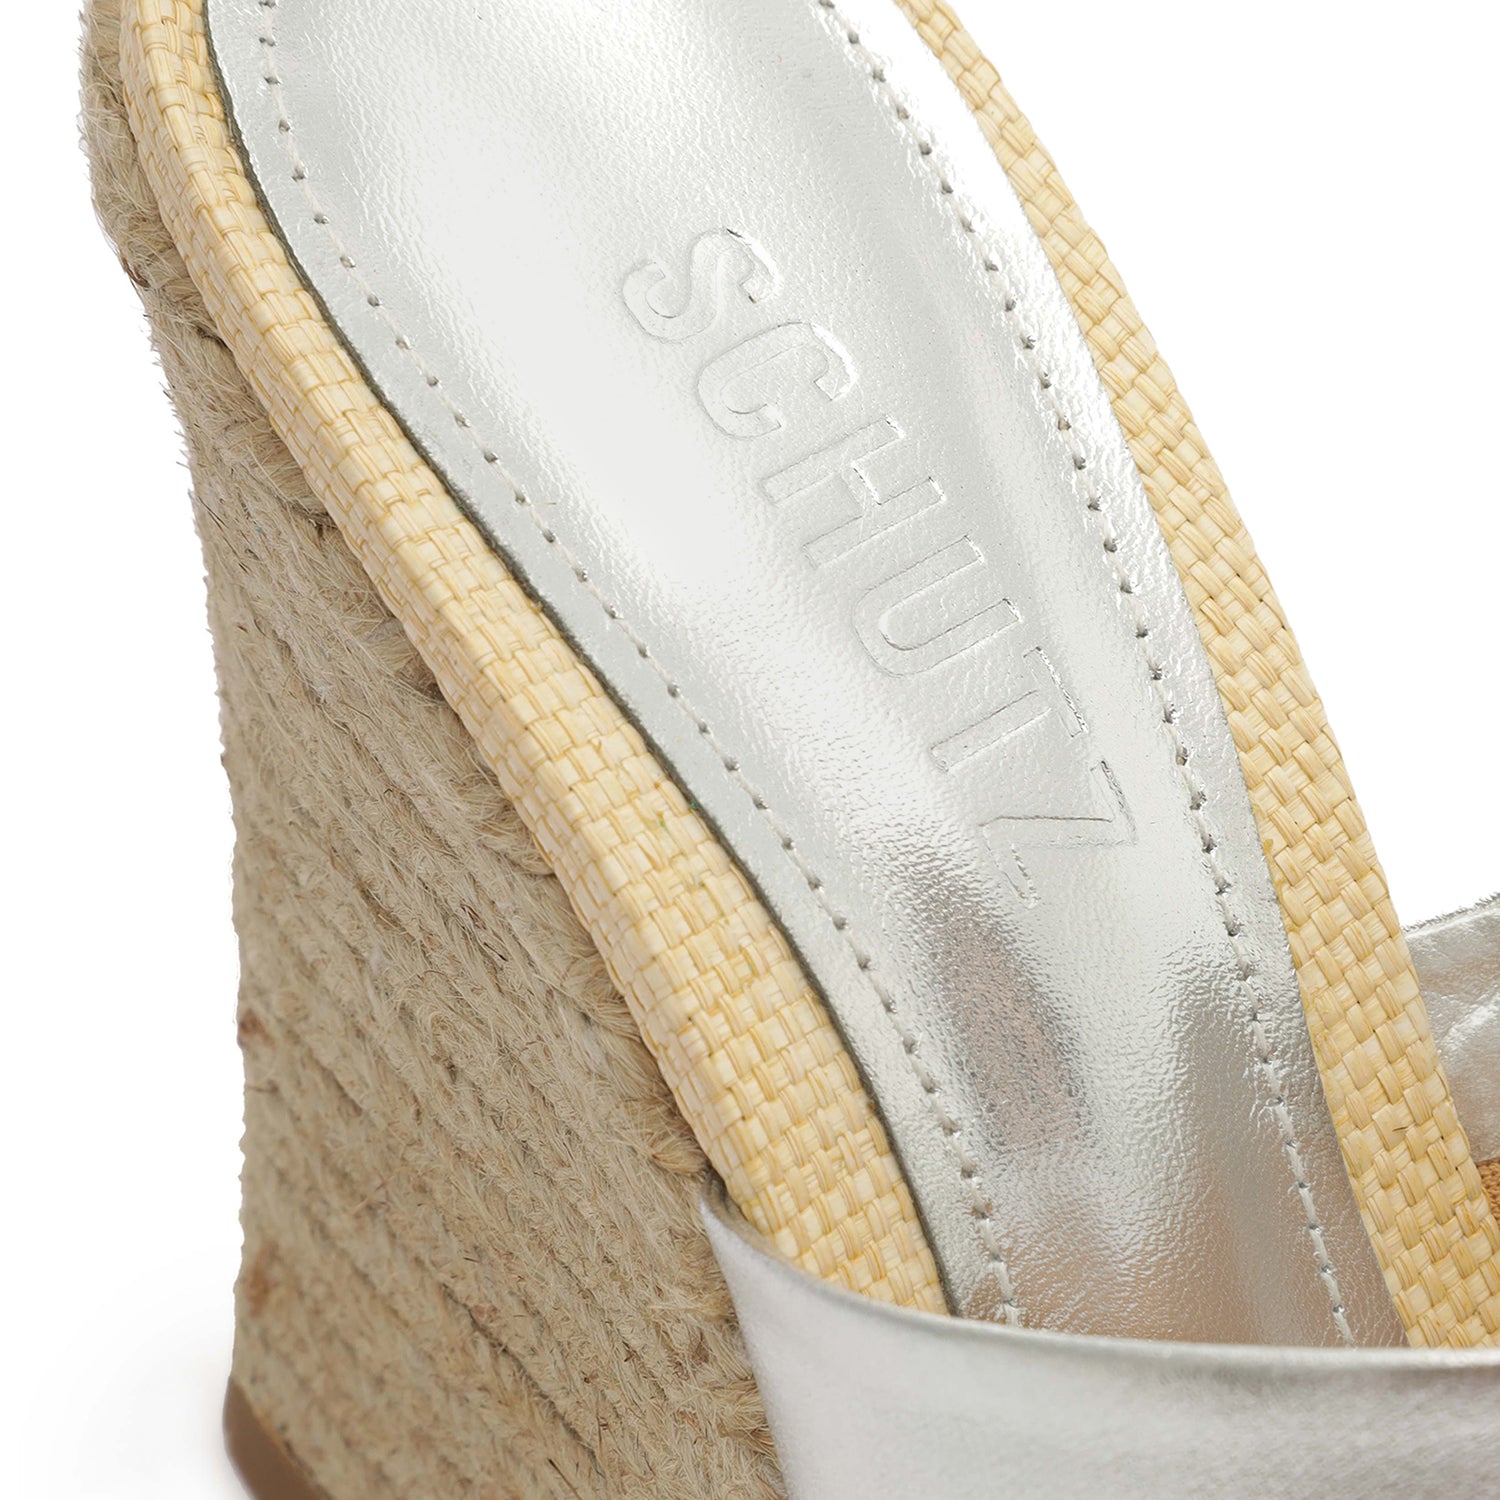 Lucy Weekend Metallic Leather Sandal Sandals Spring 23    - Schutz Shoes